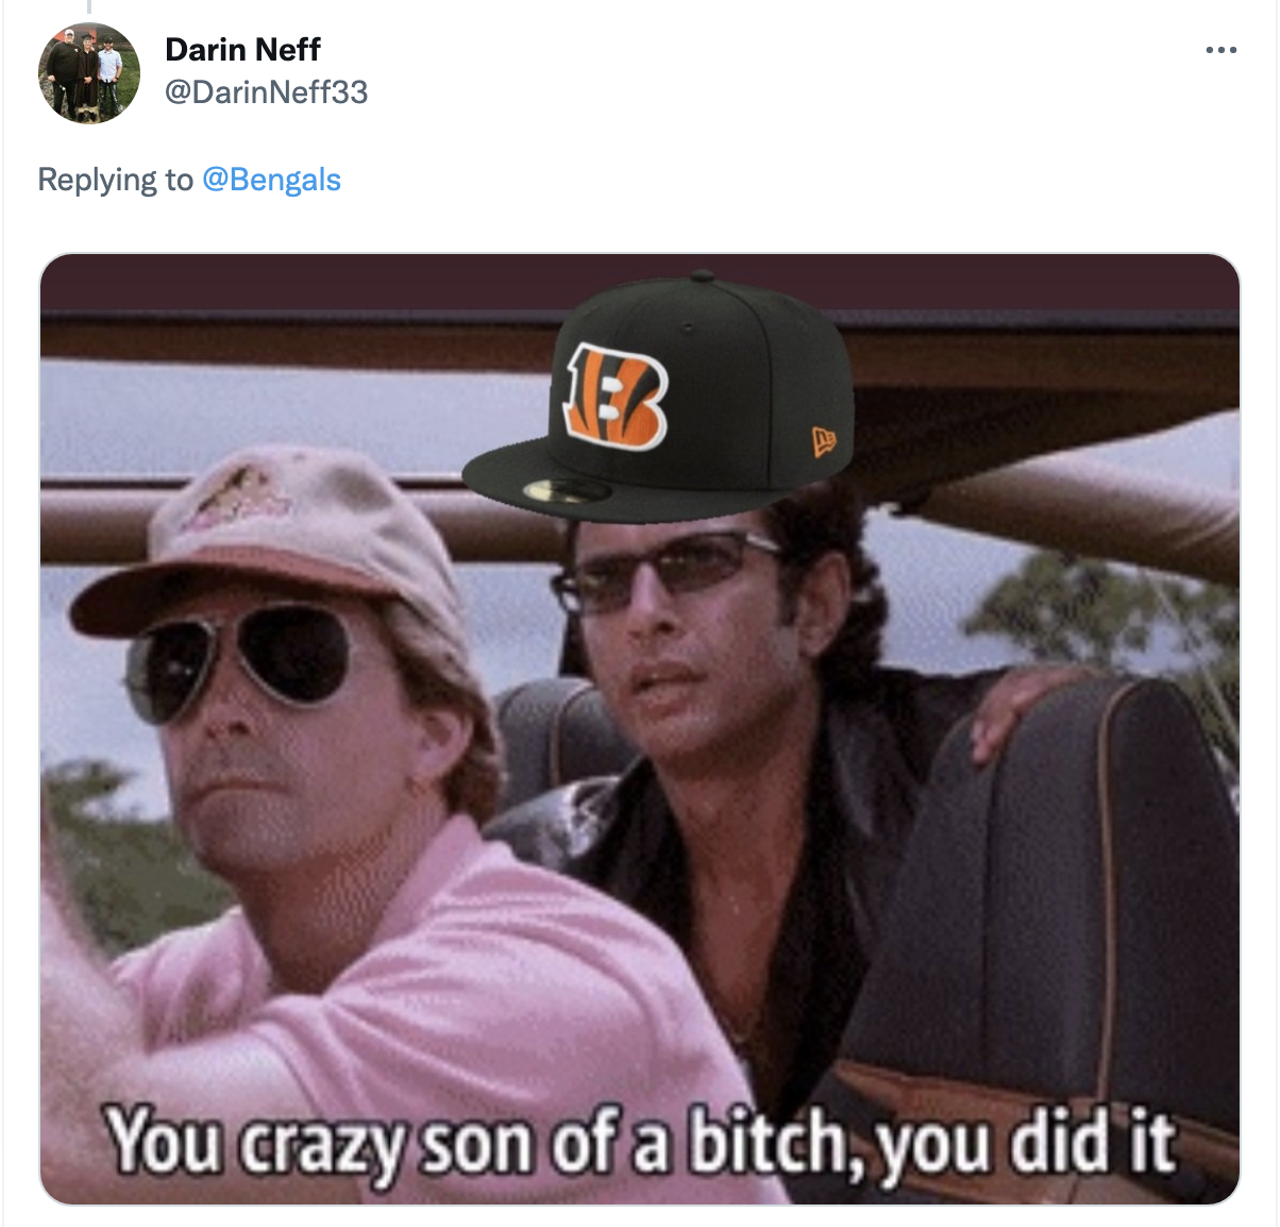 Bengals Nations Celebrates a Historic Win on Twitter